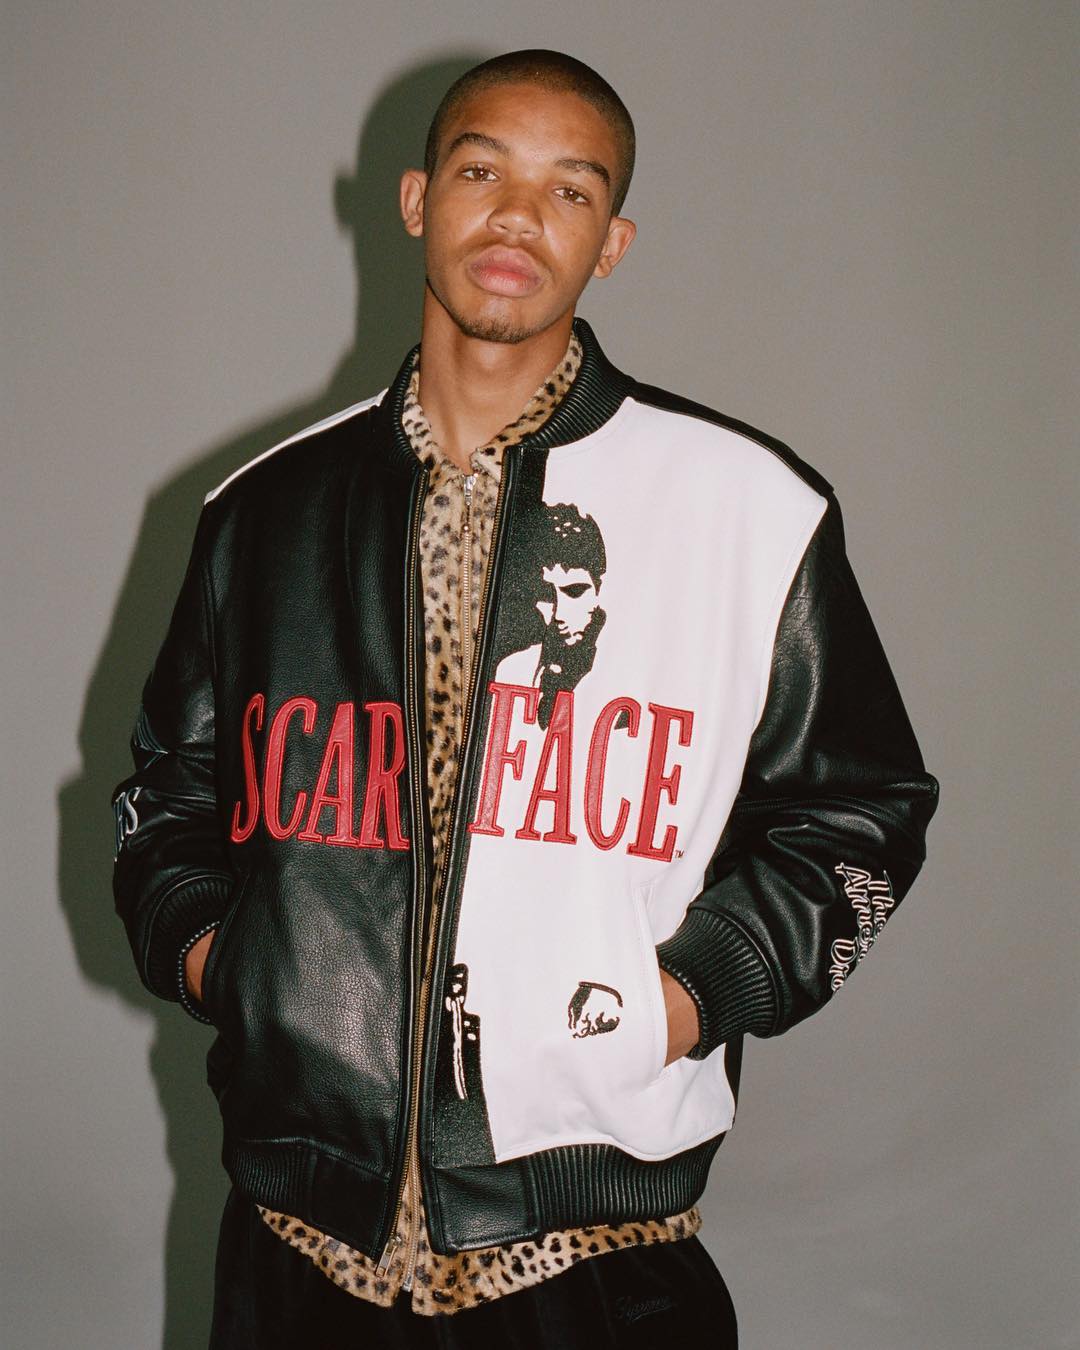 supreme-2017aw-fall-winter-scarface-embroidered-leather-jacket